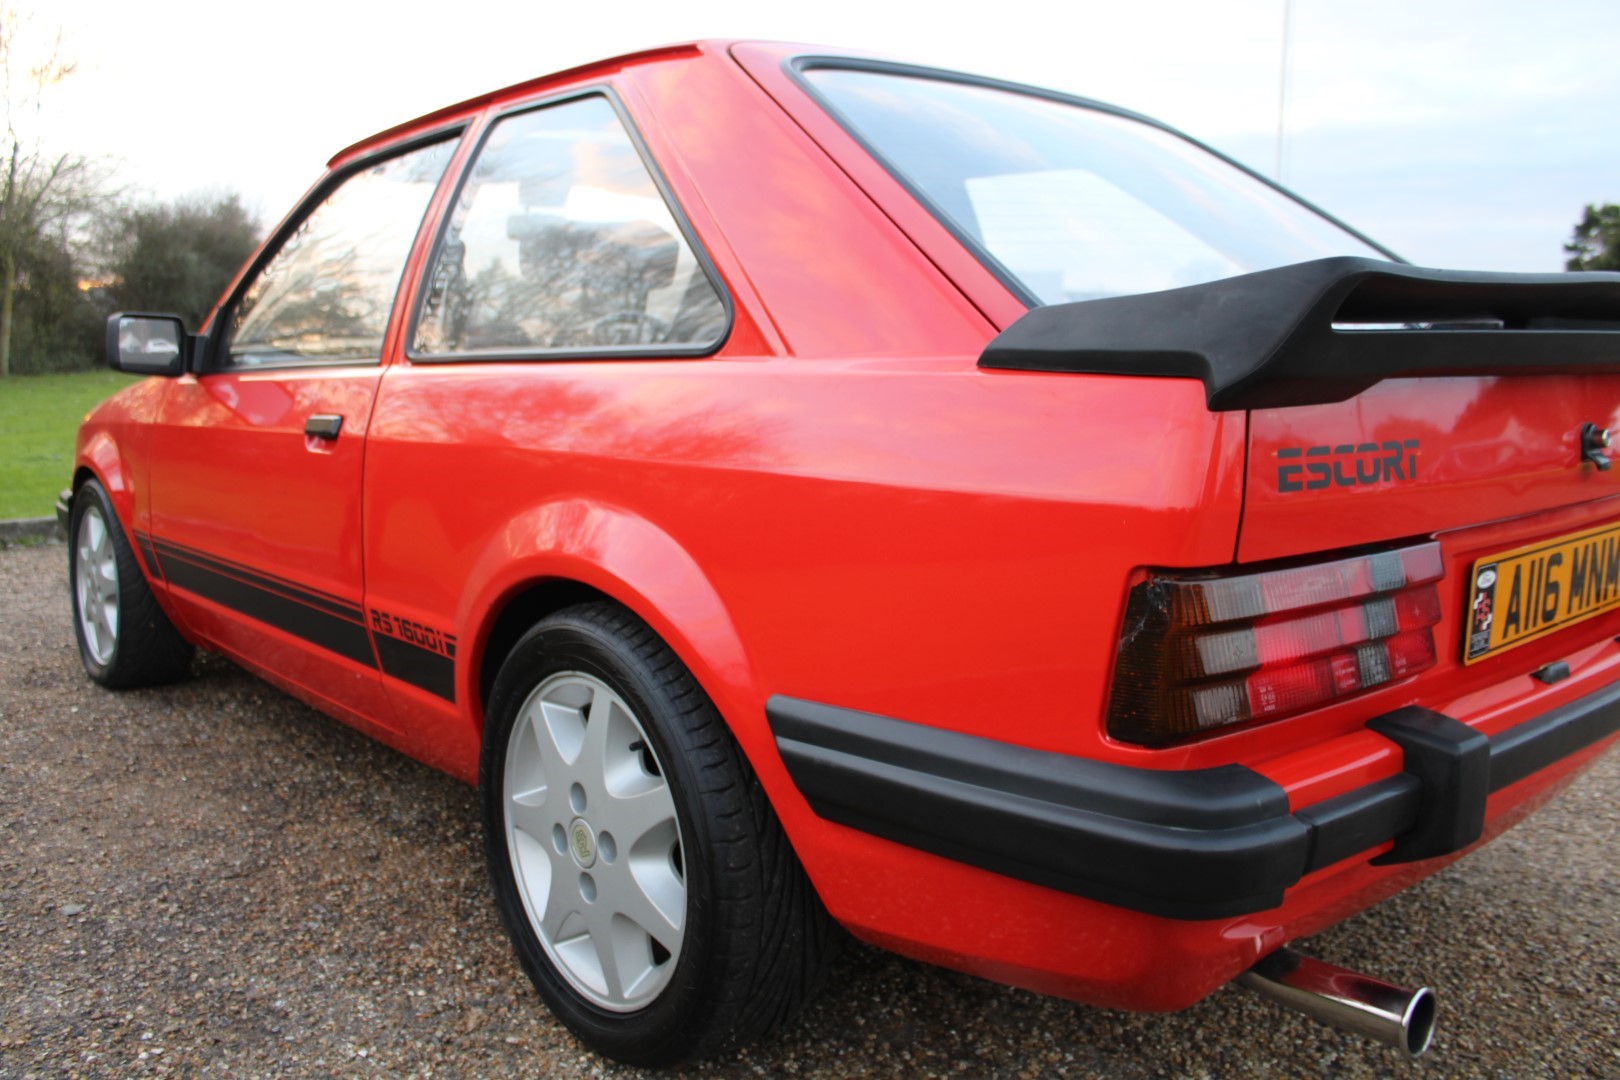 1983 Ford Escort RS 1600i - Image 8 of 24